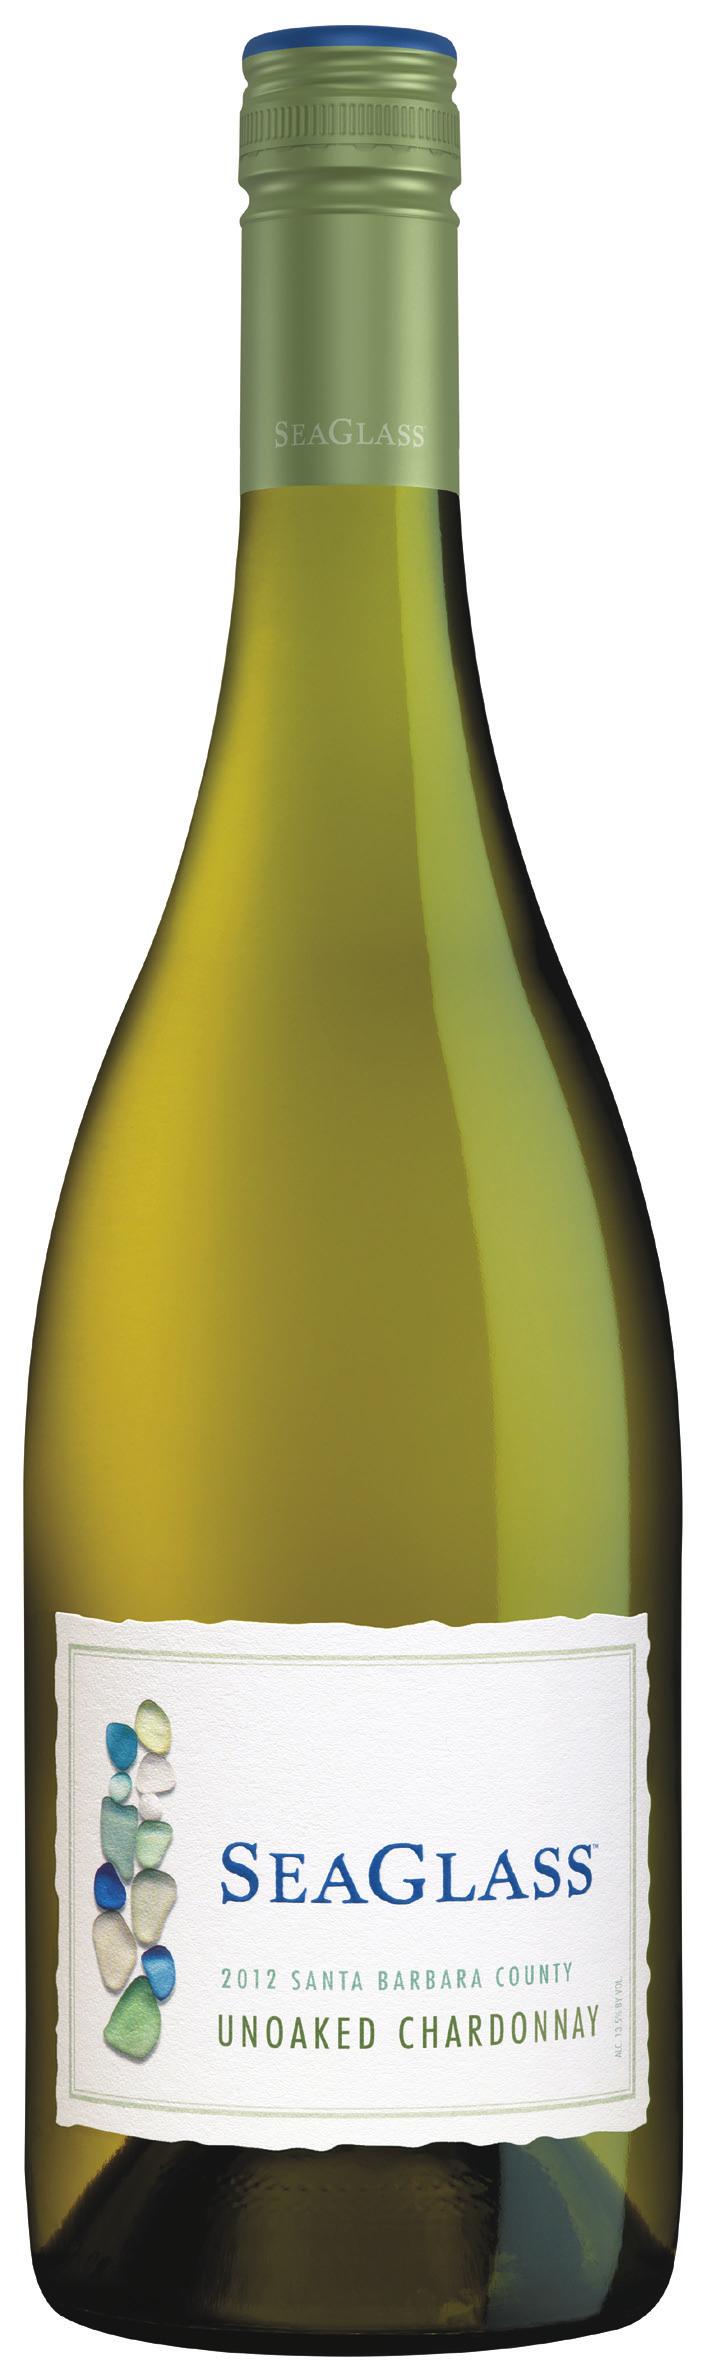 2012 UNOAKED CHARDONNAY Our 585 acre Los Alamos Chardonnay vineyard is nestled in Santa Barbara s rolling hills, a climate considered by many to be ideal for Burgundian varietals.